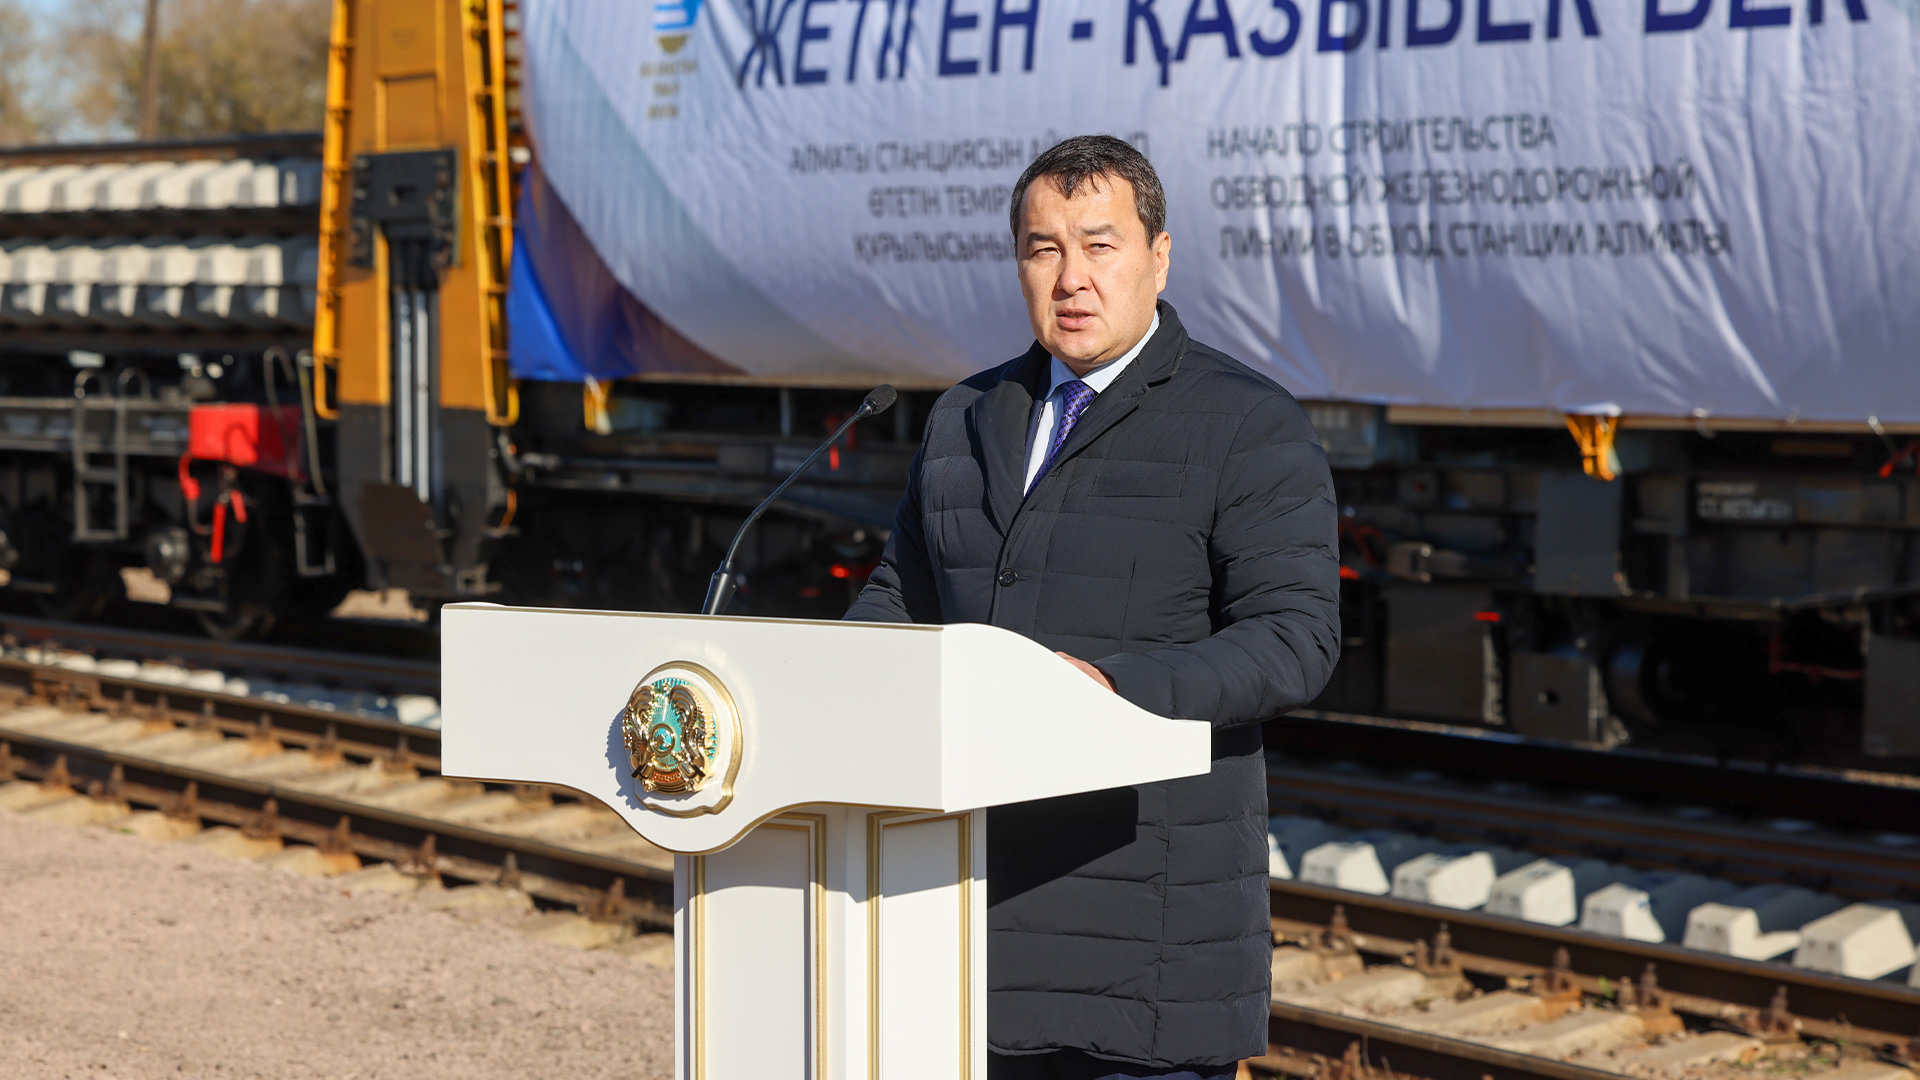 Kazakhstan launches strategic railway bypass to expedite transit and relieve Almaty station congestion 